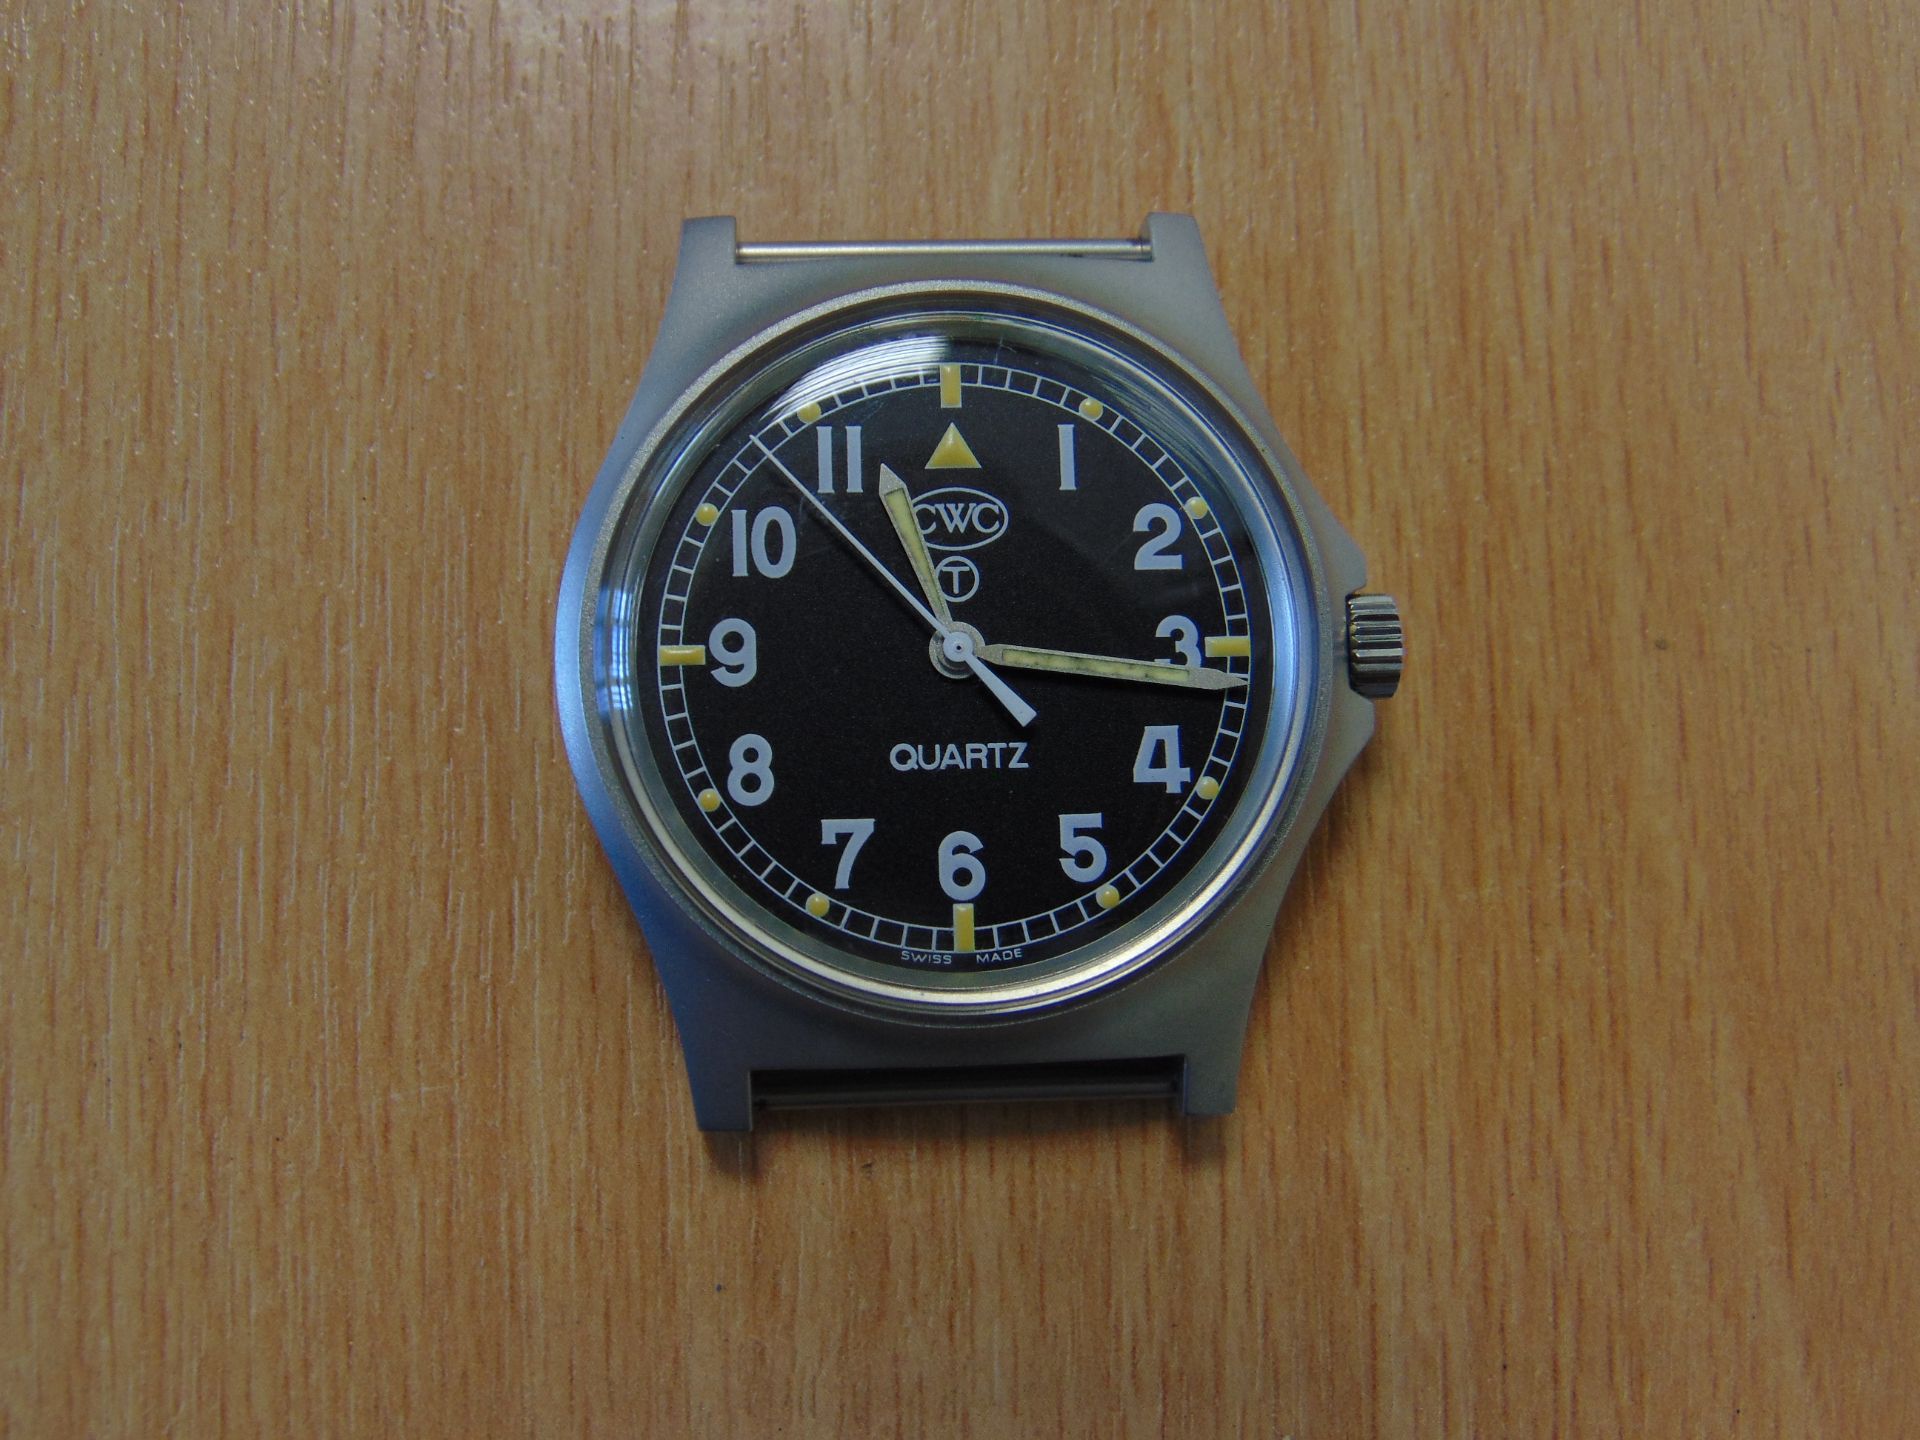 UNISSUED CWC W10 SERVICE WATCH -WATER RESISTENT TO 5ATM NATO MARKED DATED 2006 - Image 5 of 10